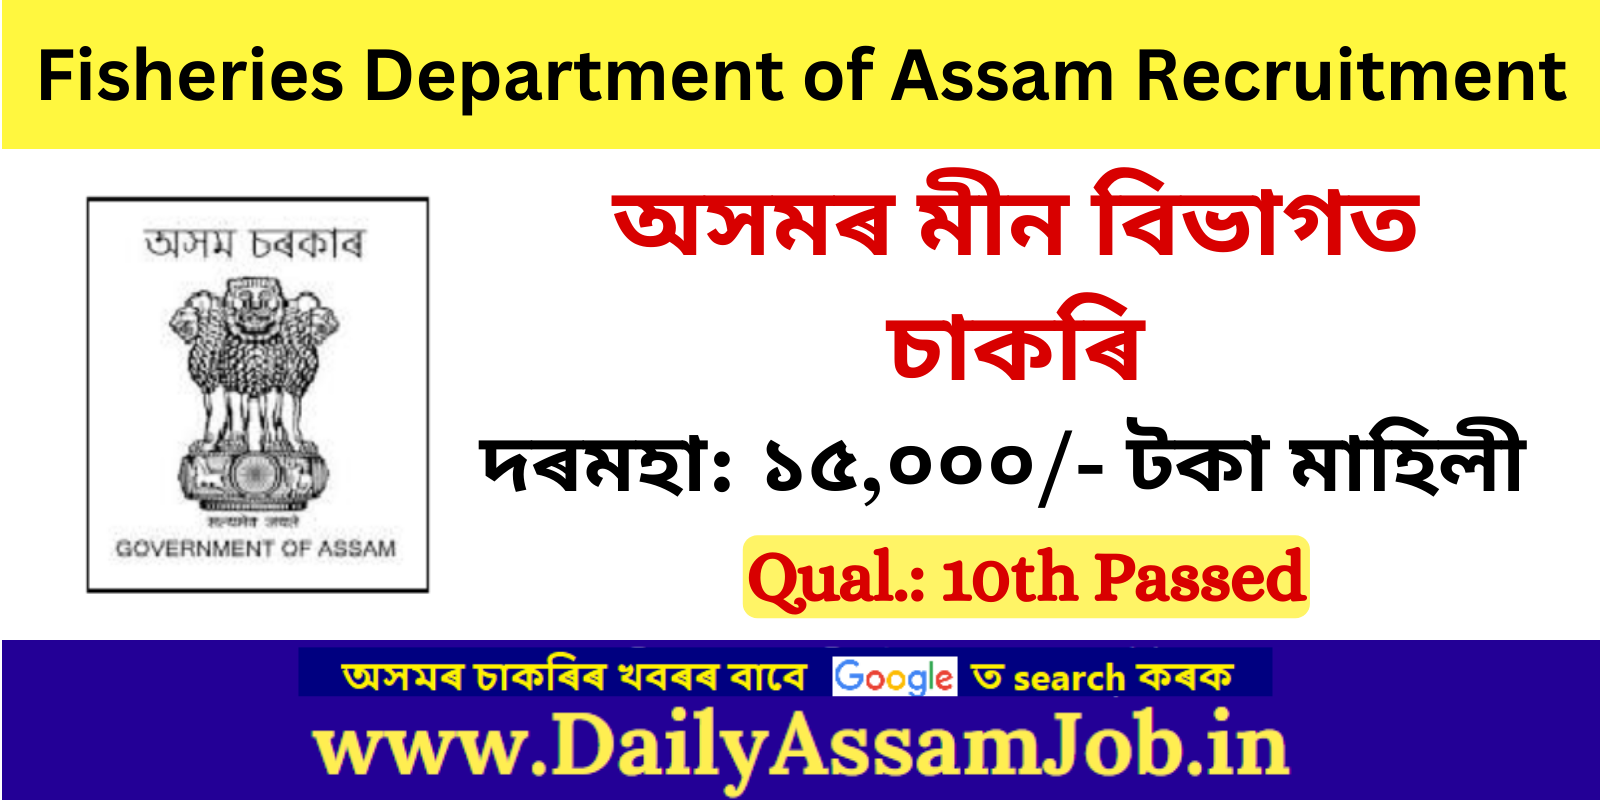 Assam Career :: Fisheries Department of Assam Recruitment for 11 DPM and MTS Vacancy